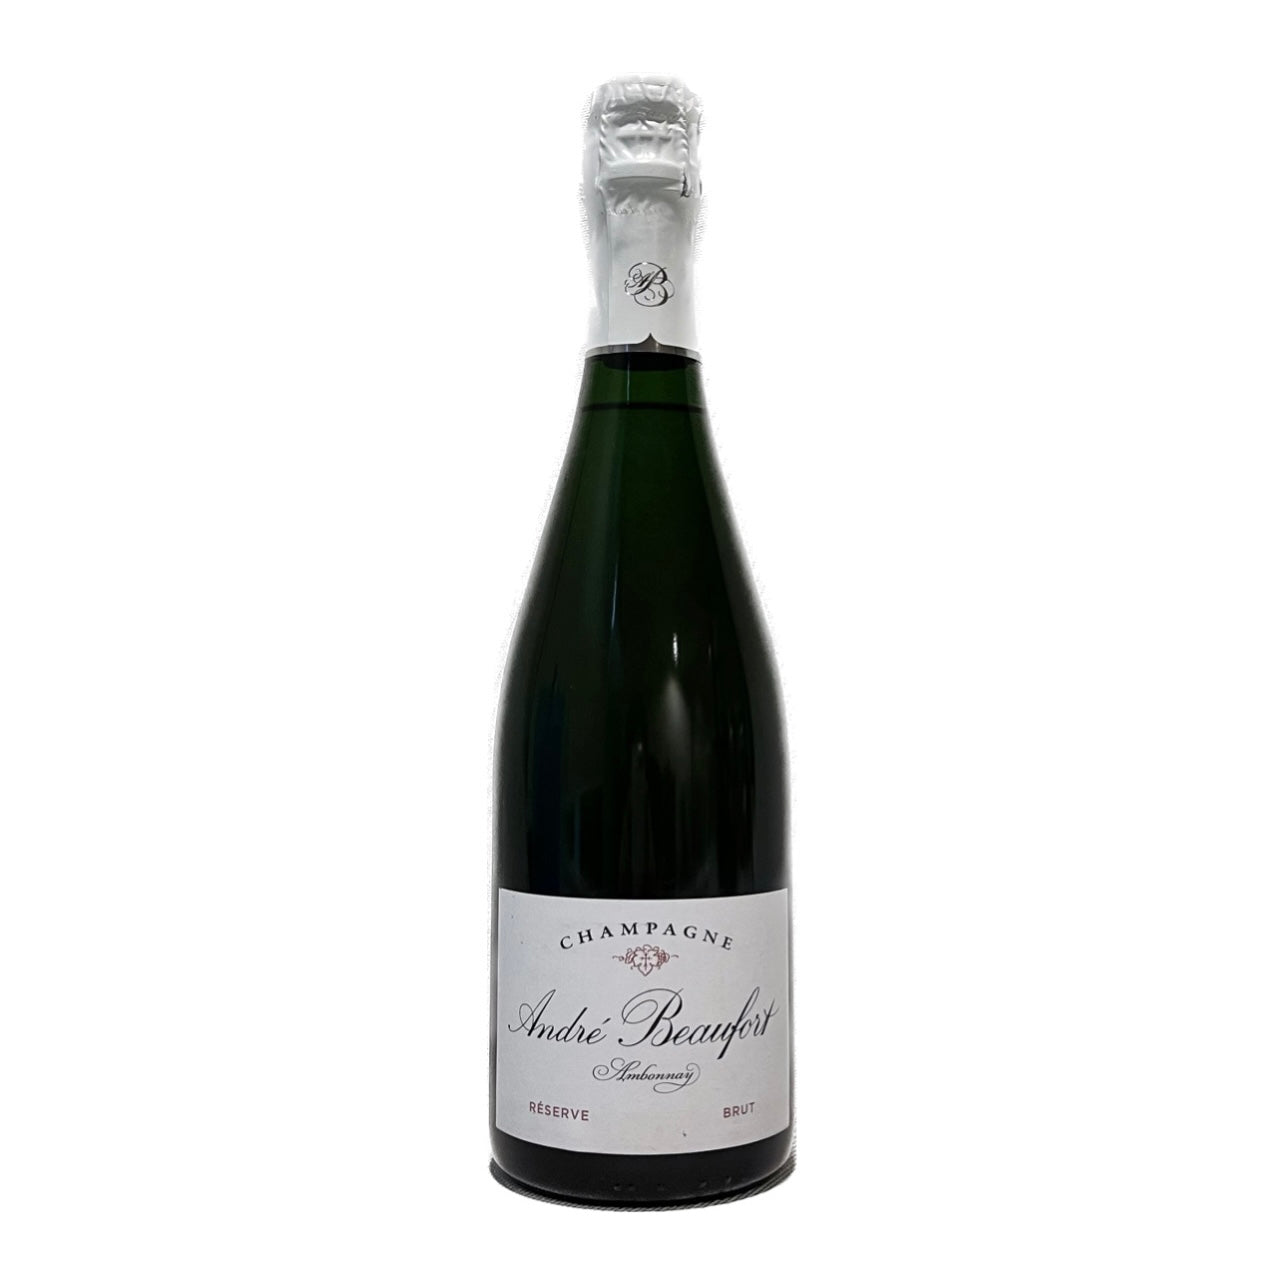 CHAMPAGNE BRUT RESERVE "AMBONNAY" - ANDRE BEAUFORT